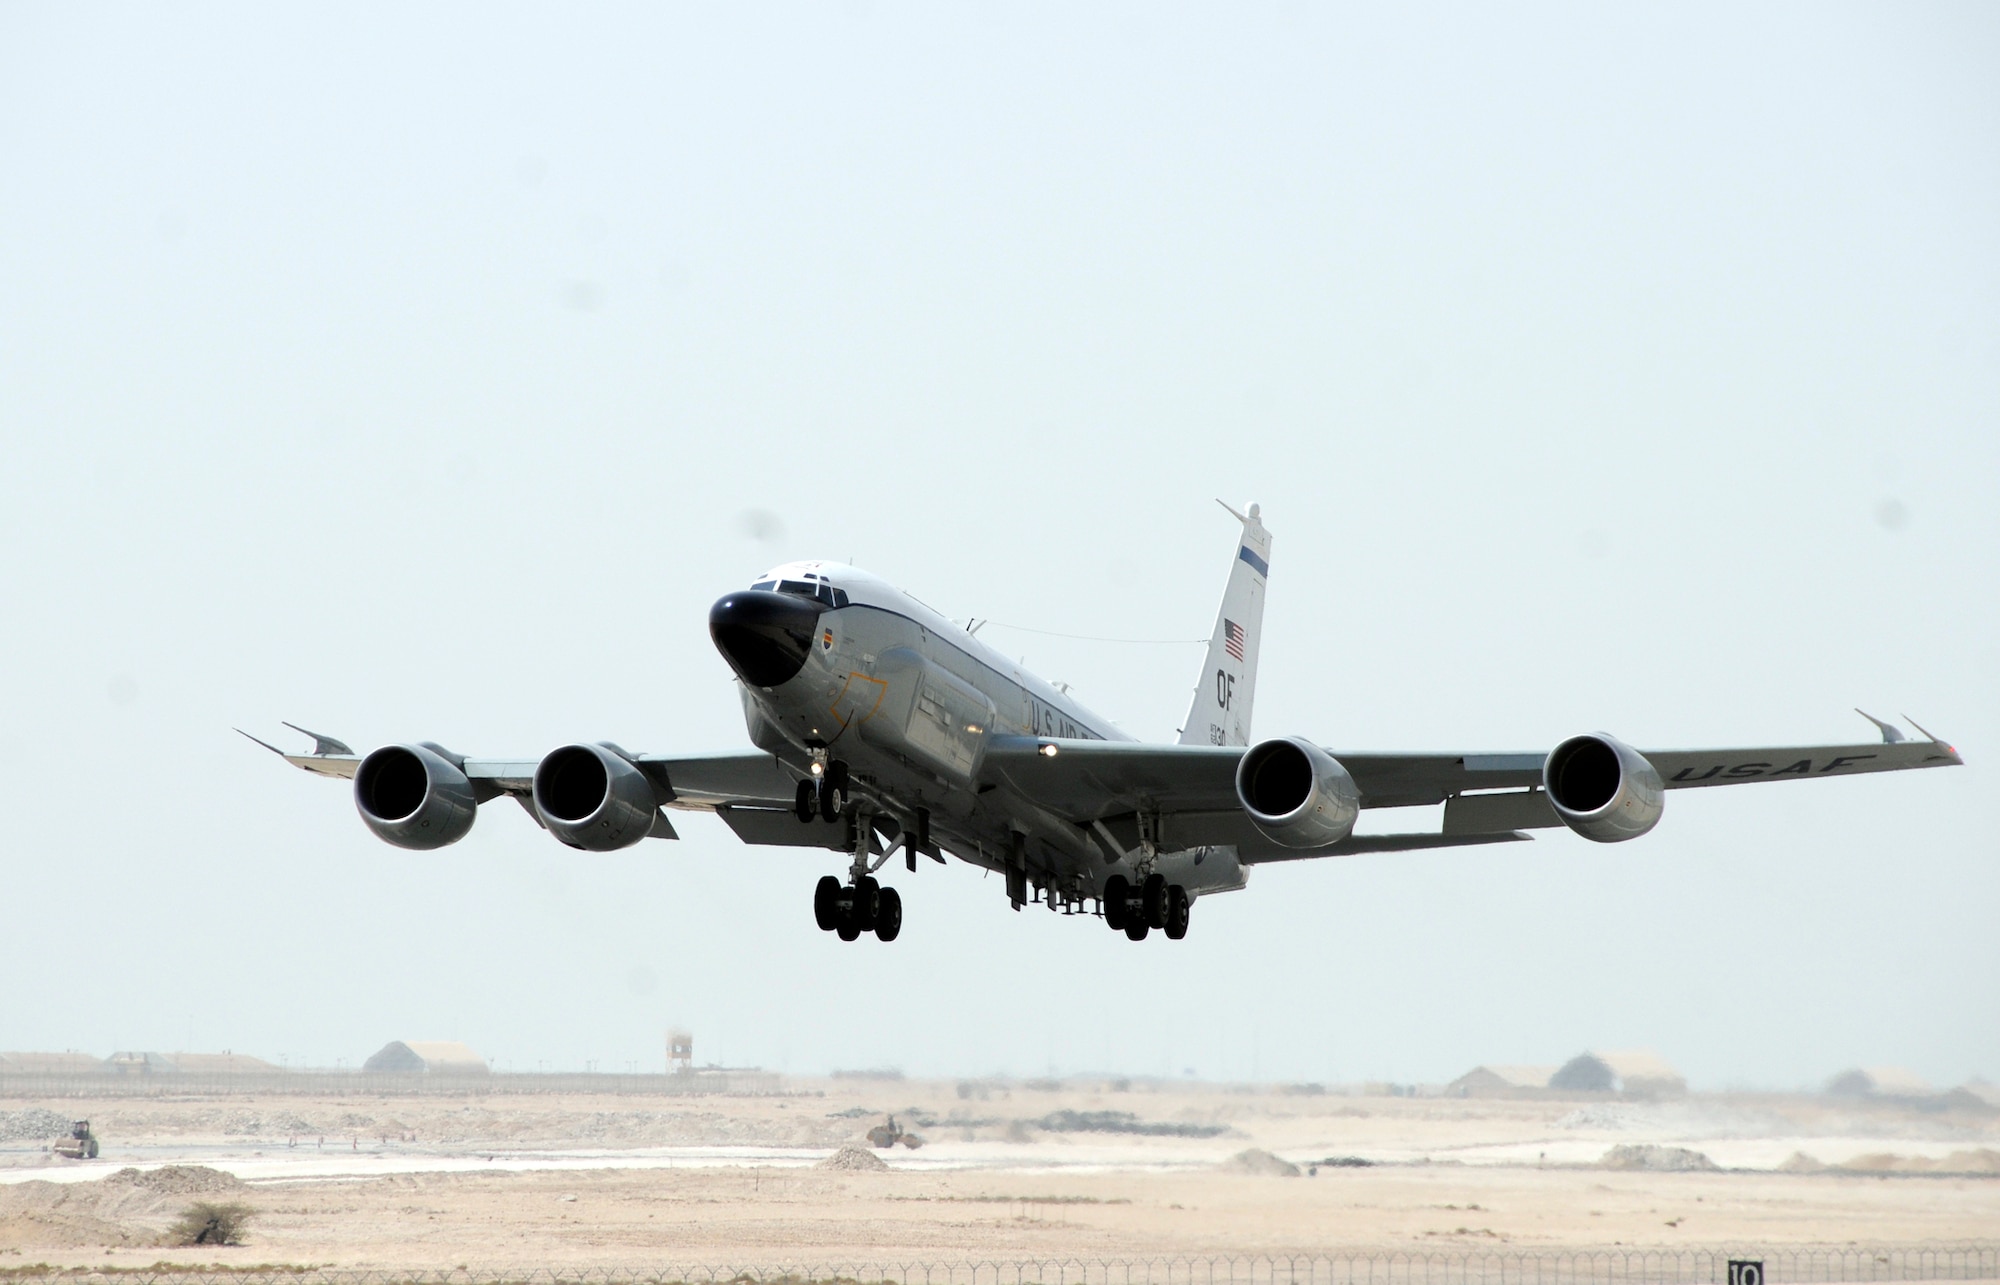 An RC-135 Rivet Joint from the 45th Expeditionary Reconnaissance Squadron takes off for a mission here Aug. 26, 2008. The 45 ERS supports theater and national-level consumers with near real-time on-scene intelligence collection, analysis and dissemination. (U.S. Air Force by Tech. Sgt. Michael Boquette)